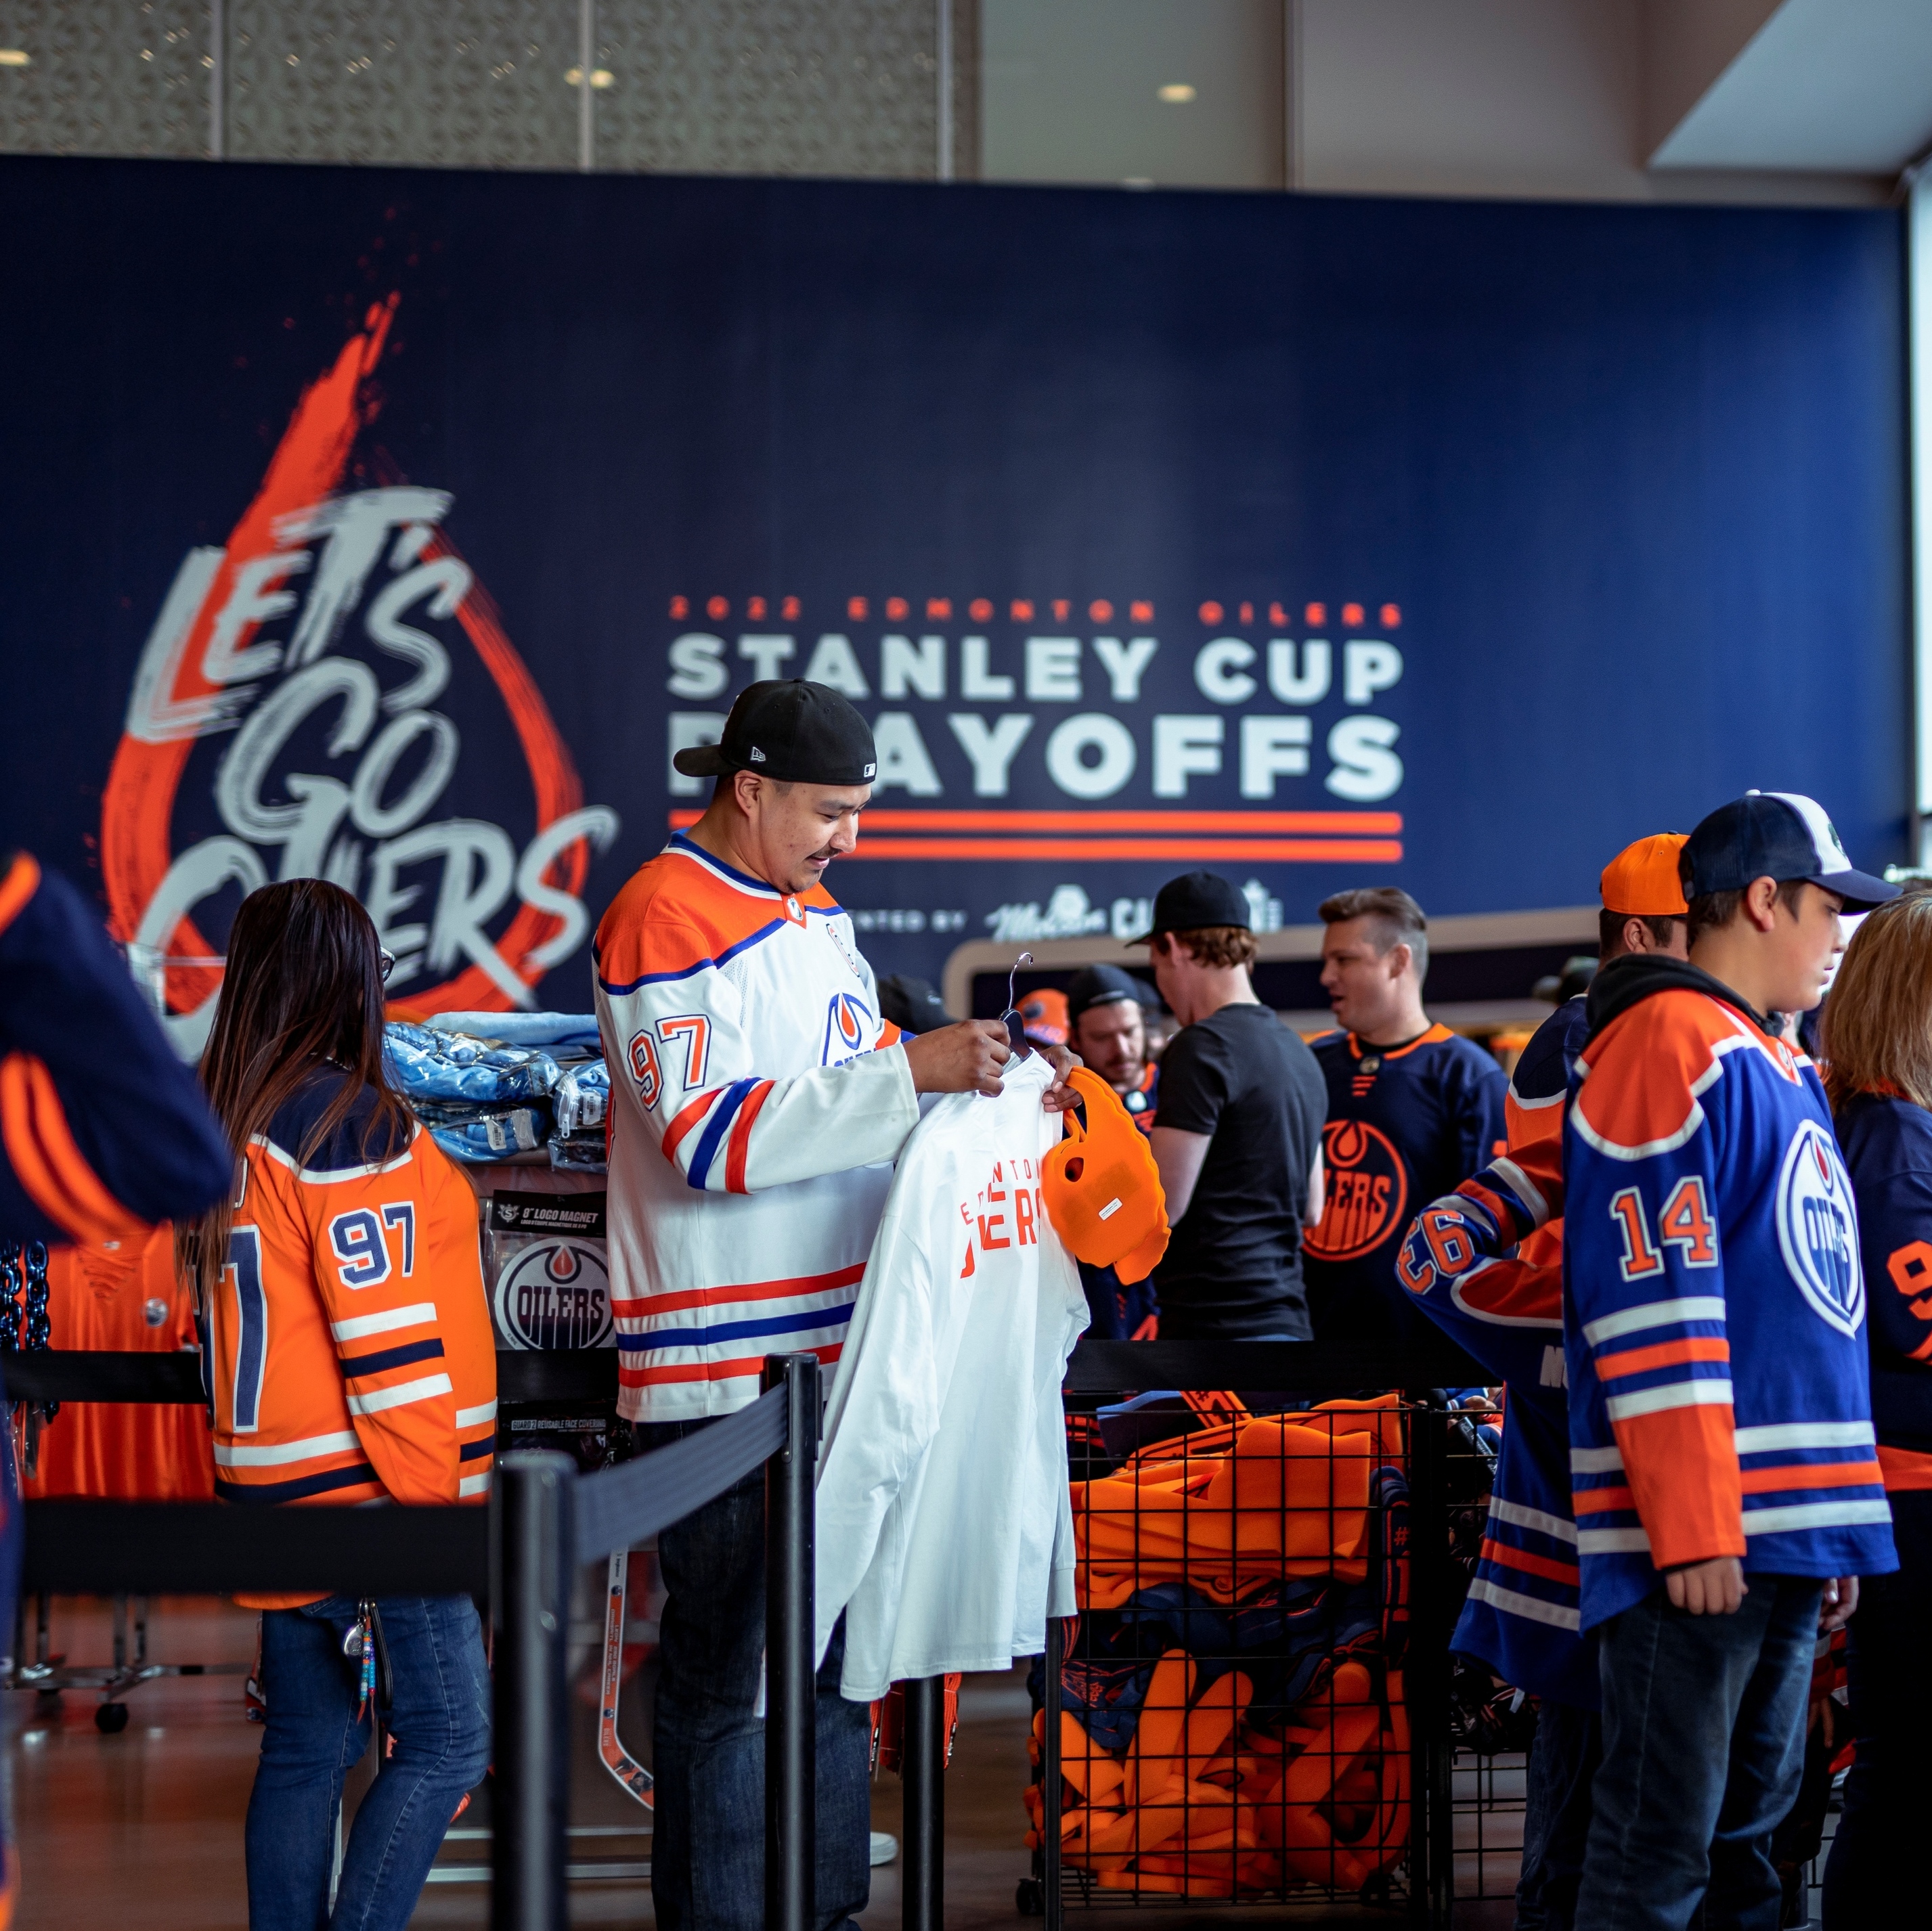 Edmonton Oilers - The #Oilers Store's pop-up shop in ROGERS PLACE's Ford  Hall will be open Tuesday through Friday this week starting at noon! Our  Kingsway Mall location will also be open